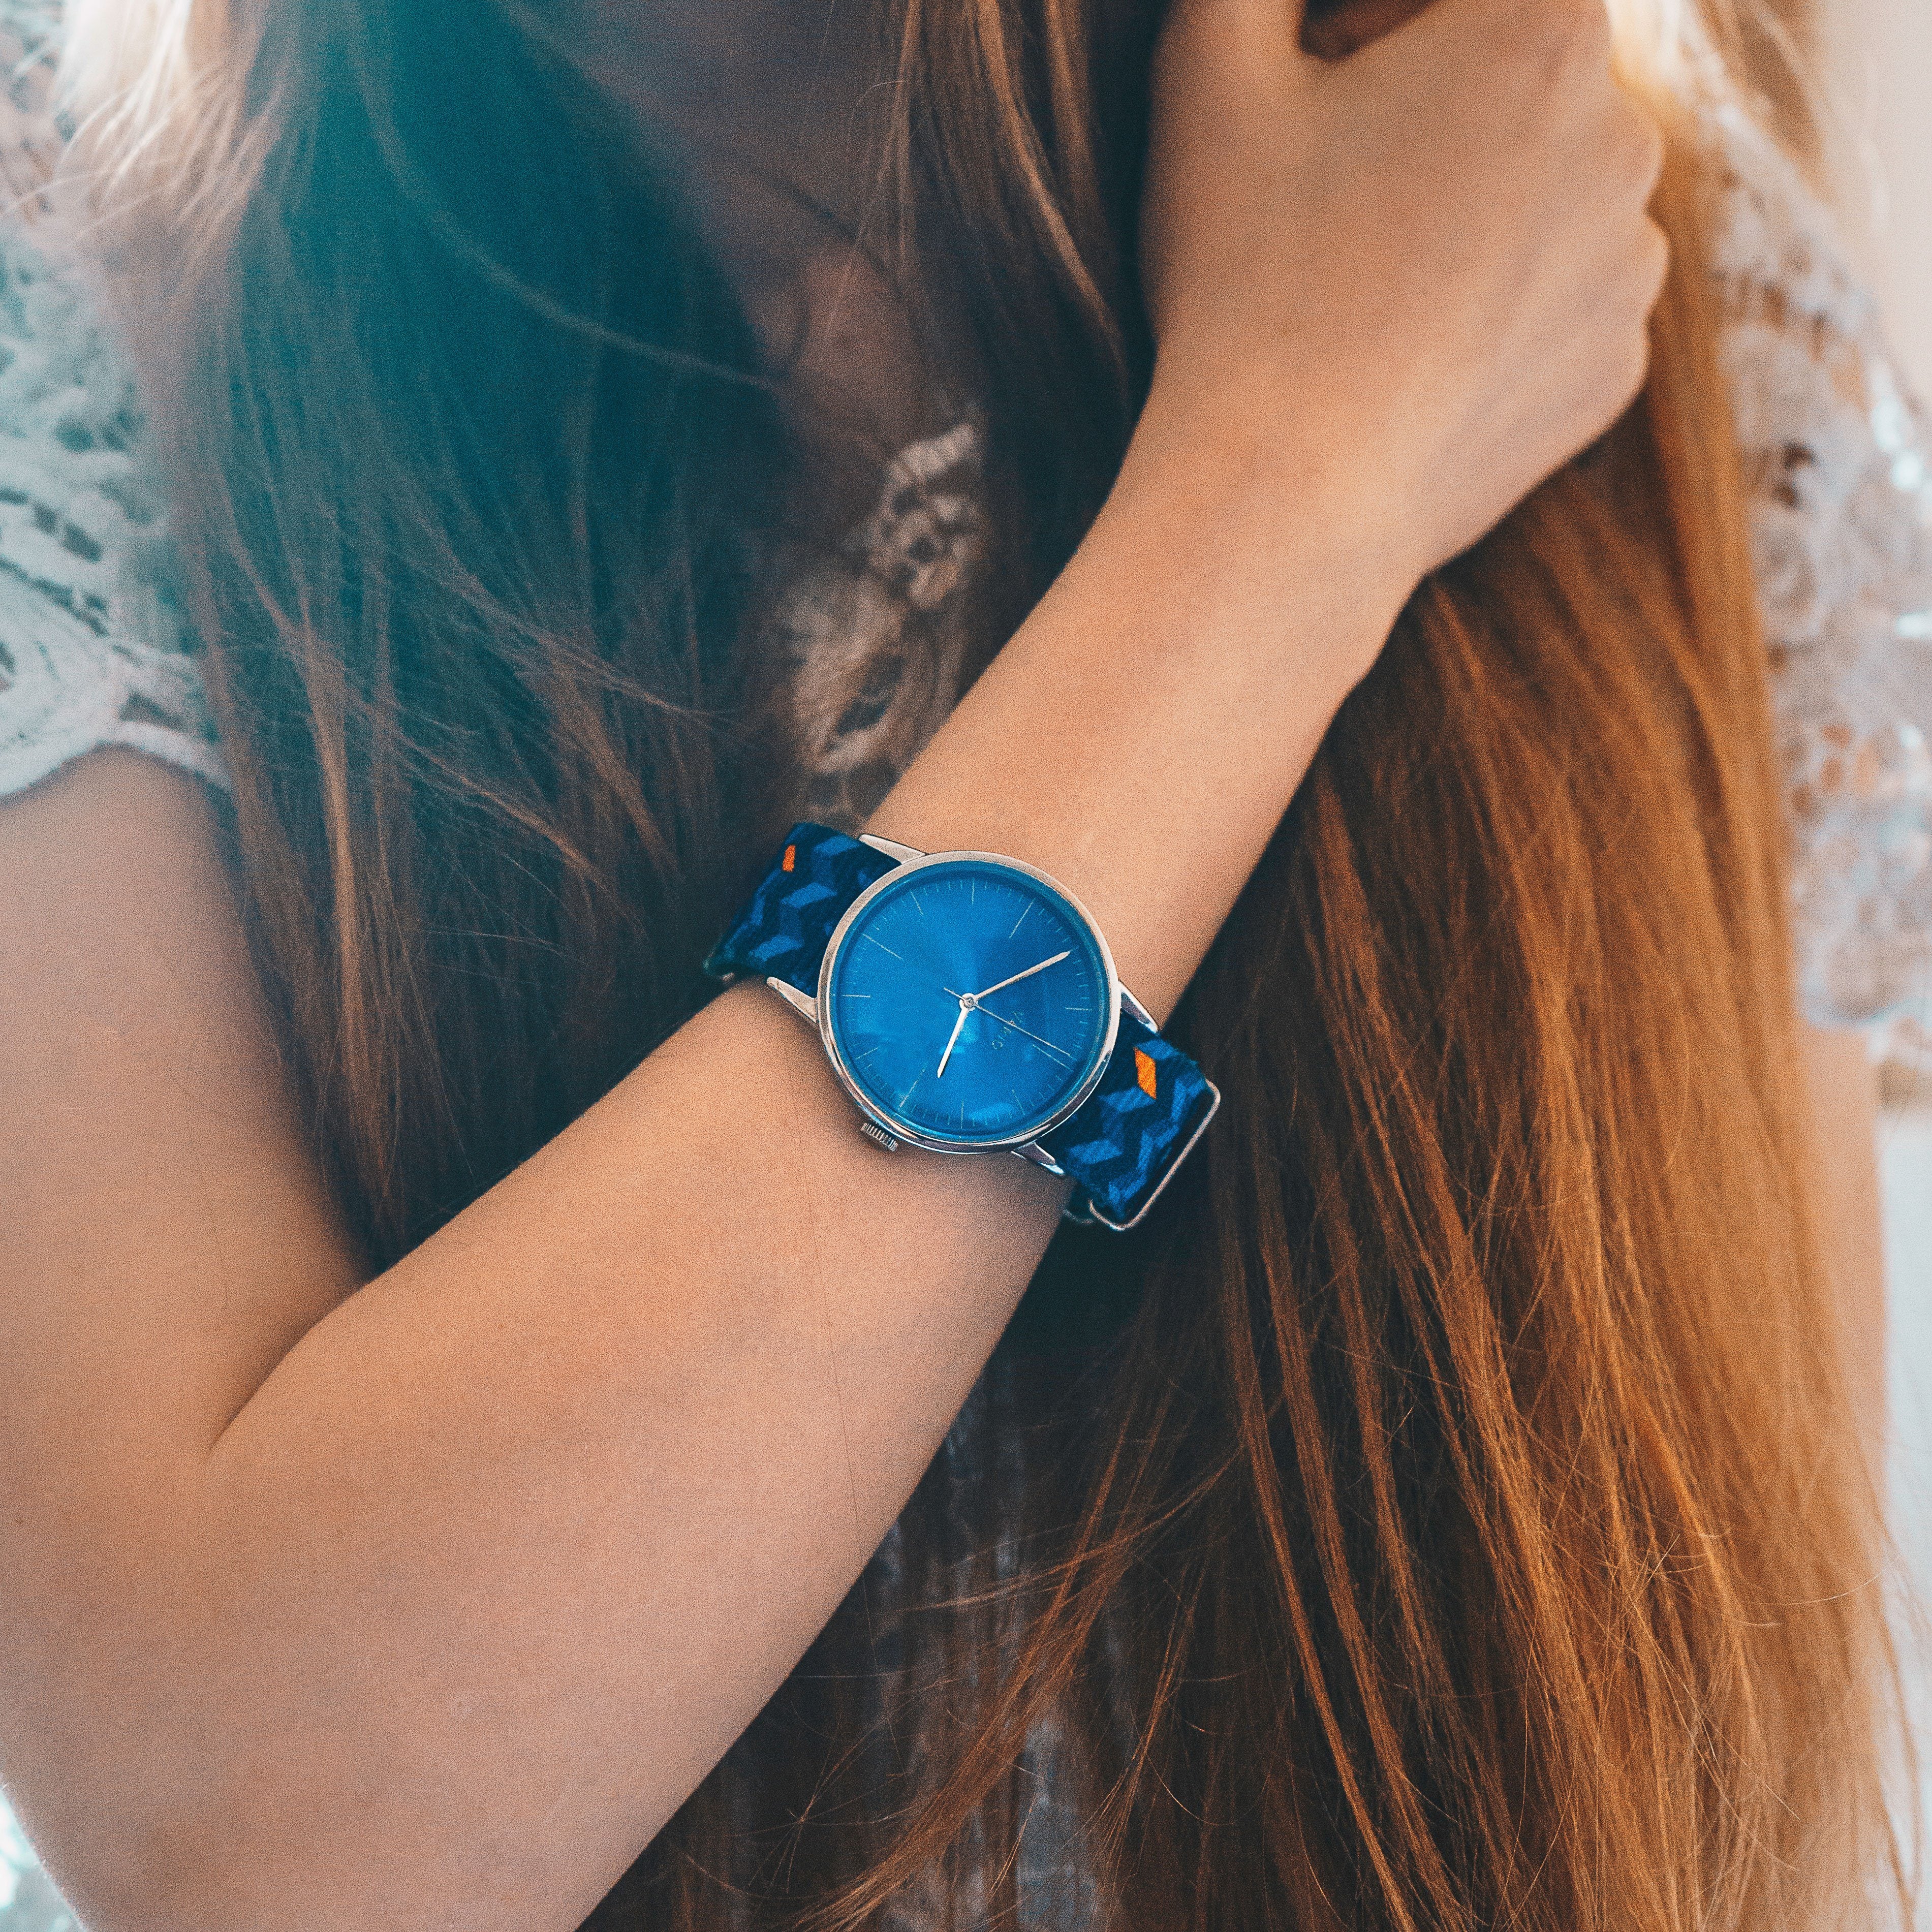 Vario Eclipse dress watch is suitable for ladies too! Don't you think?